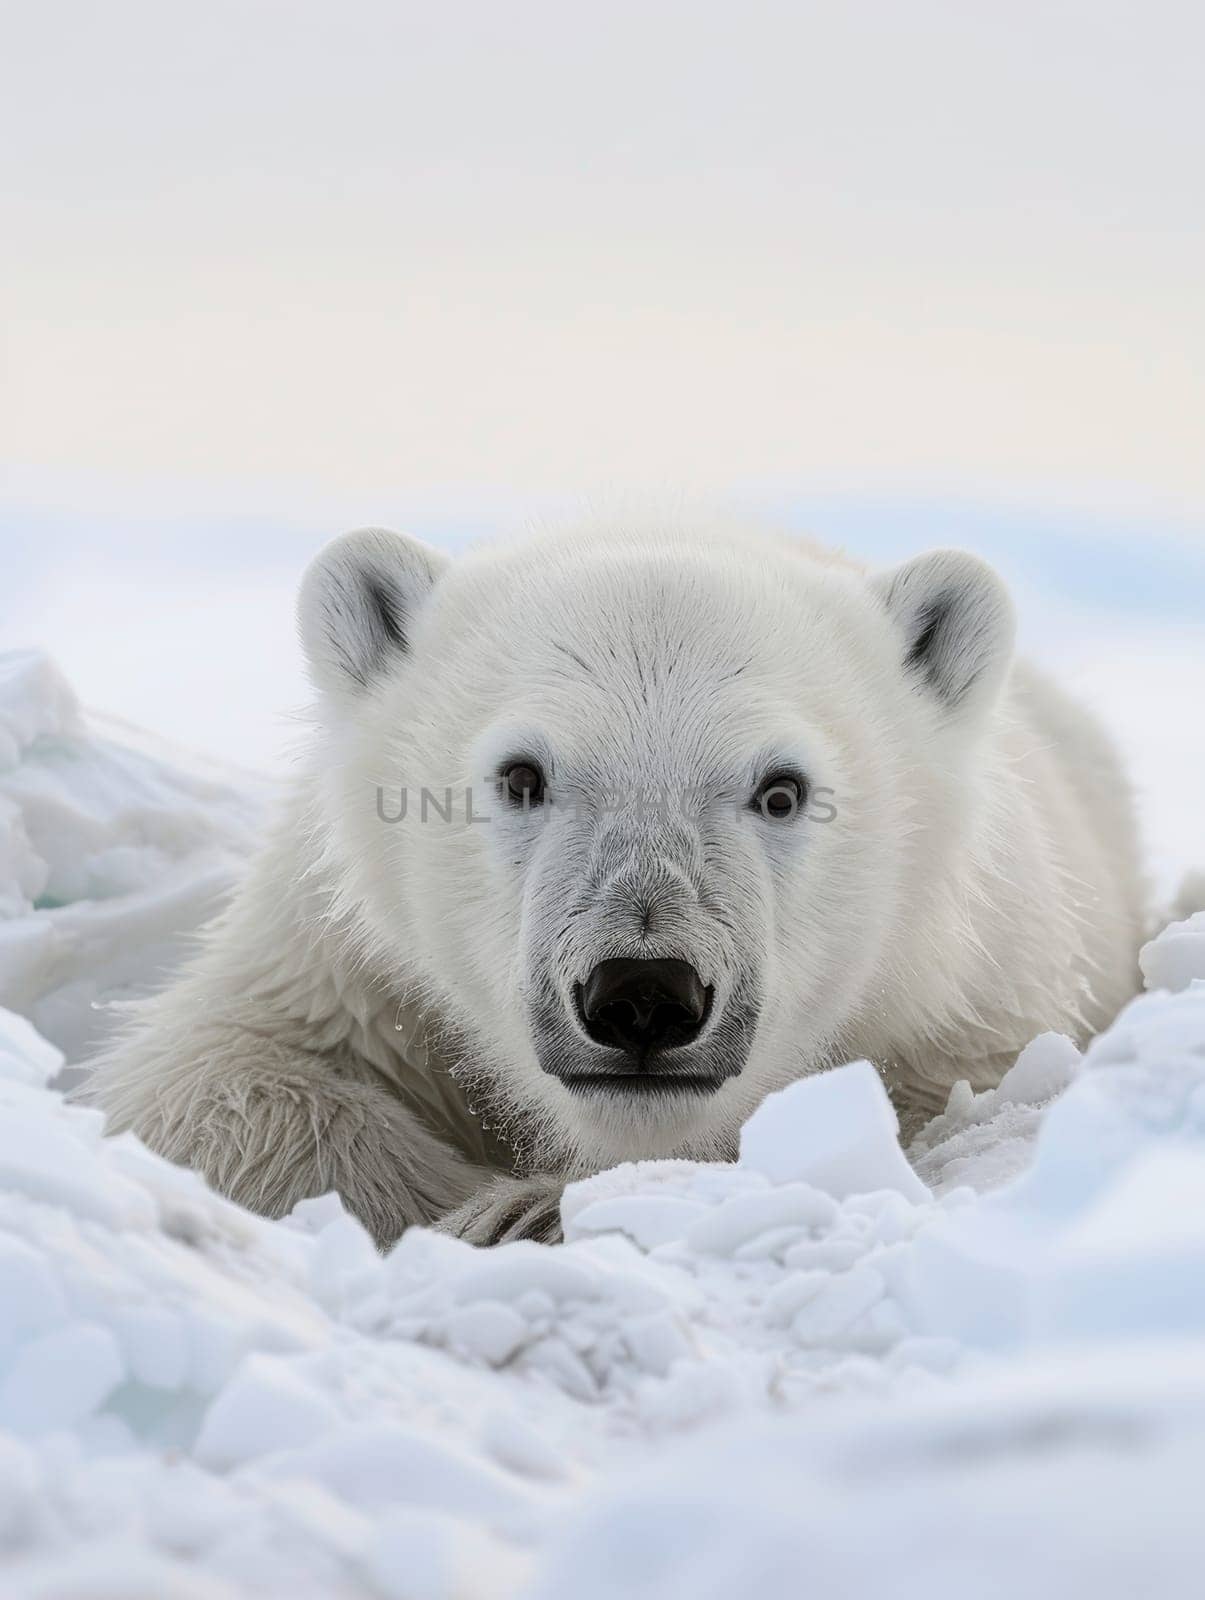 A polar bear peers curiously at the camera, nestled in the frosty embrace of its arctic environment. White fur blends seamlessly with the icy backdrop, conveying a sense of calm and resilience. by sfinks